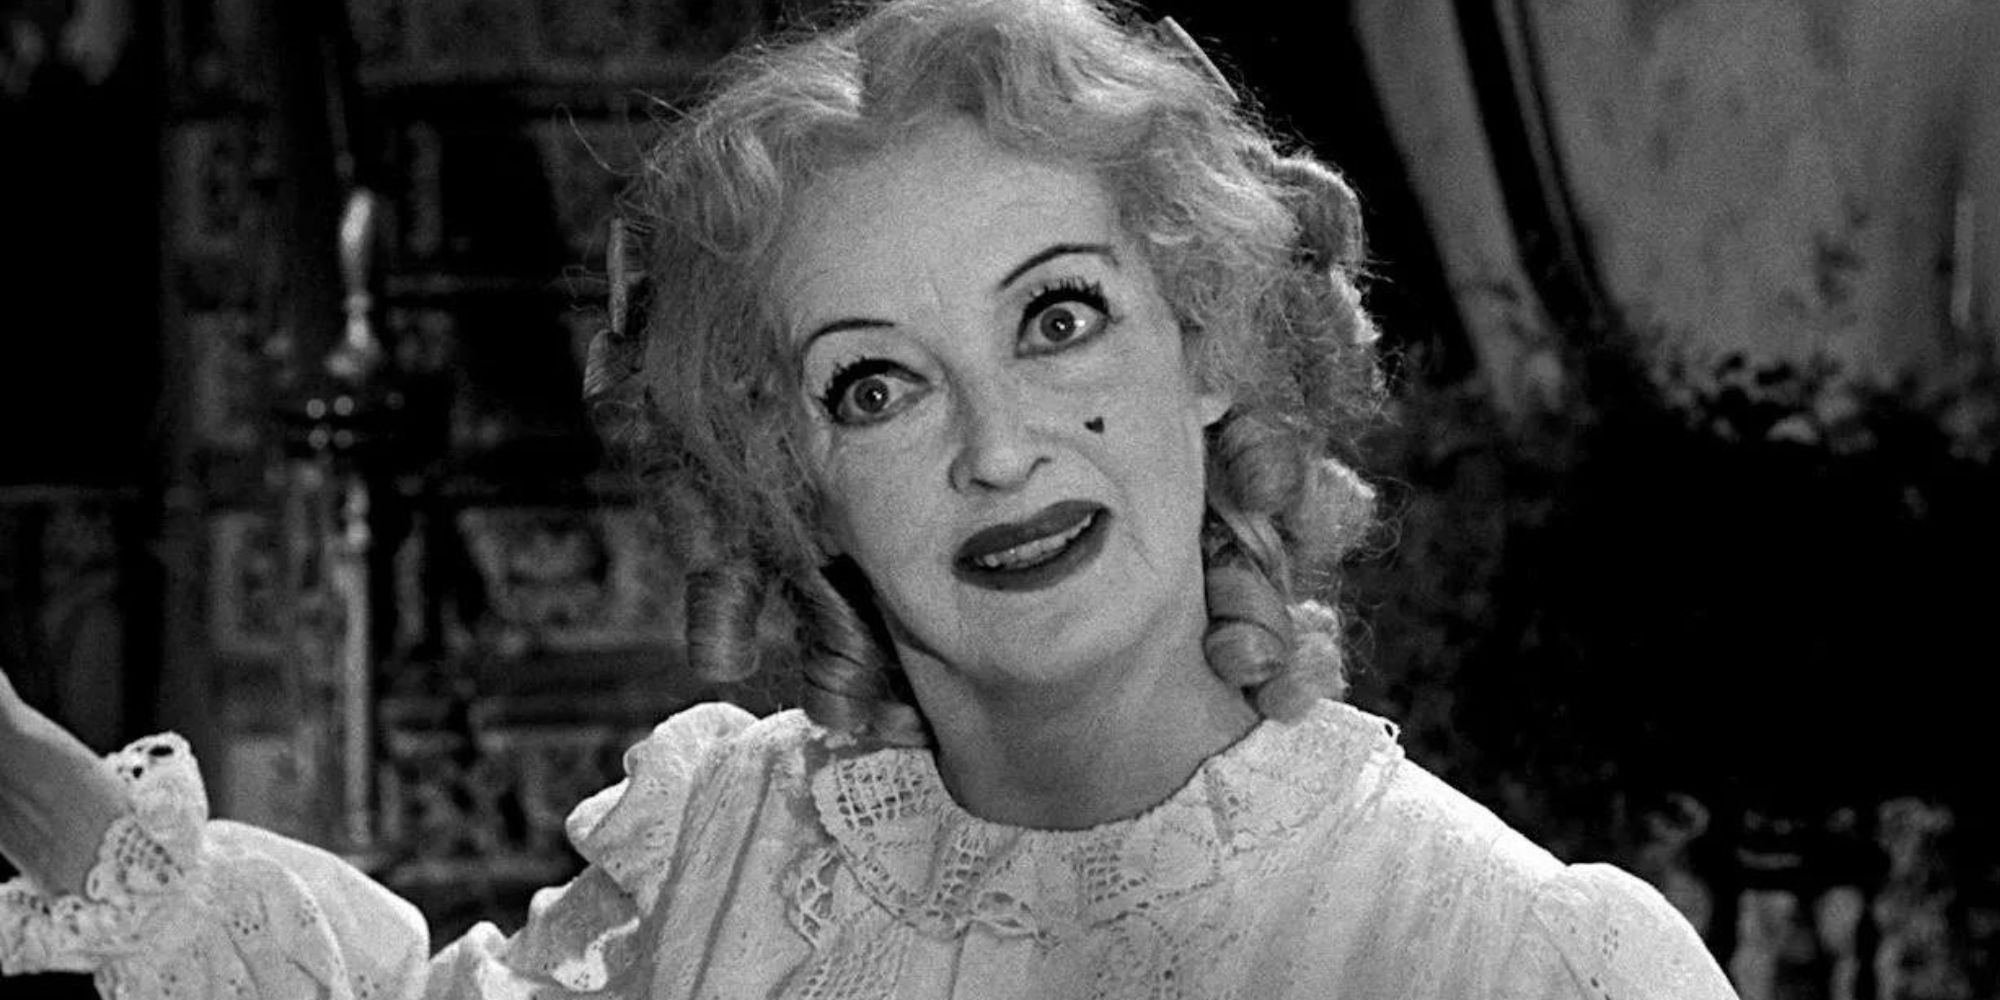 Baby Jane Hudson smiling widely in What Ever Happened to Baby Jane?